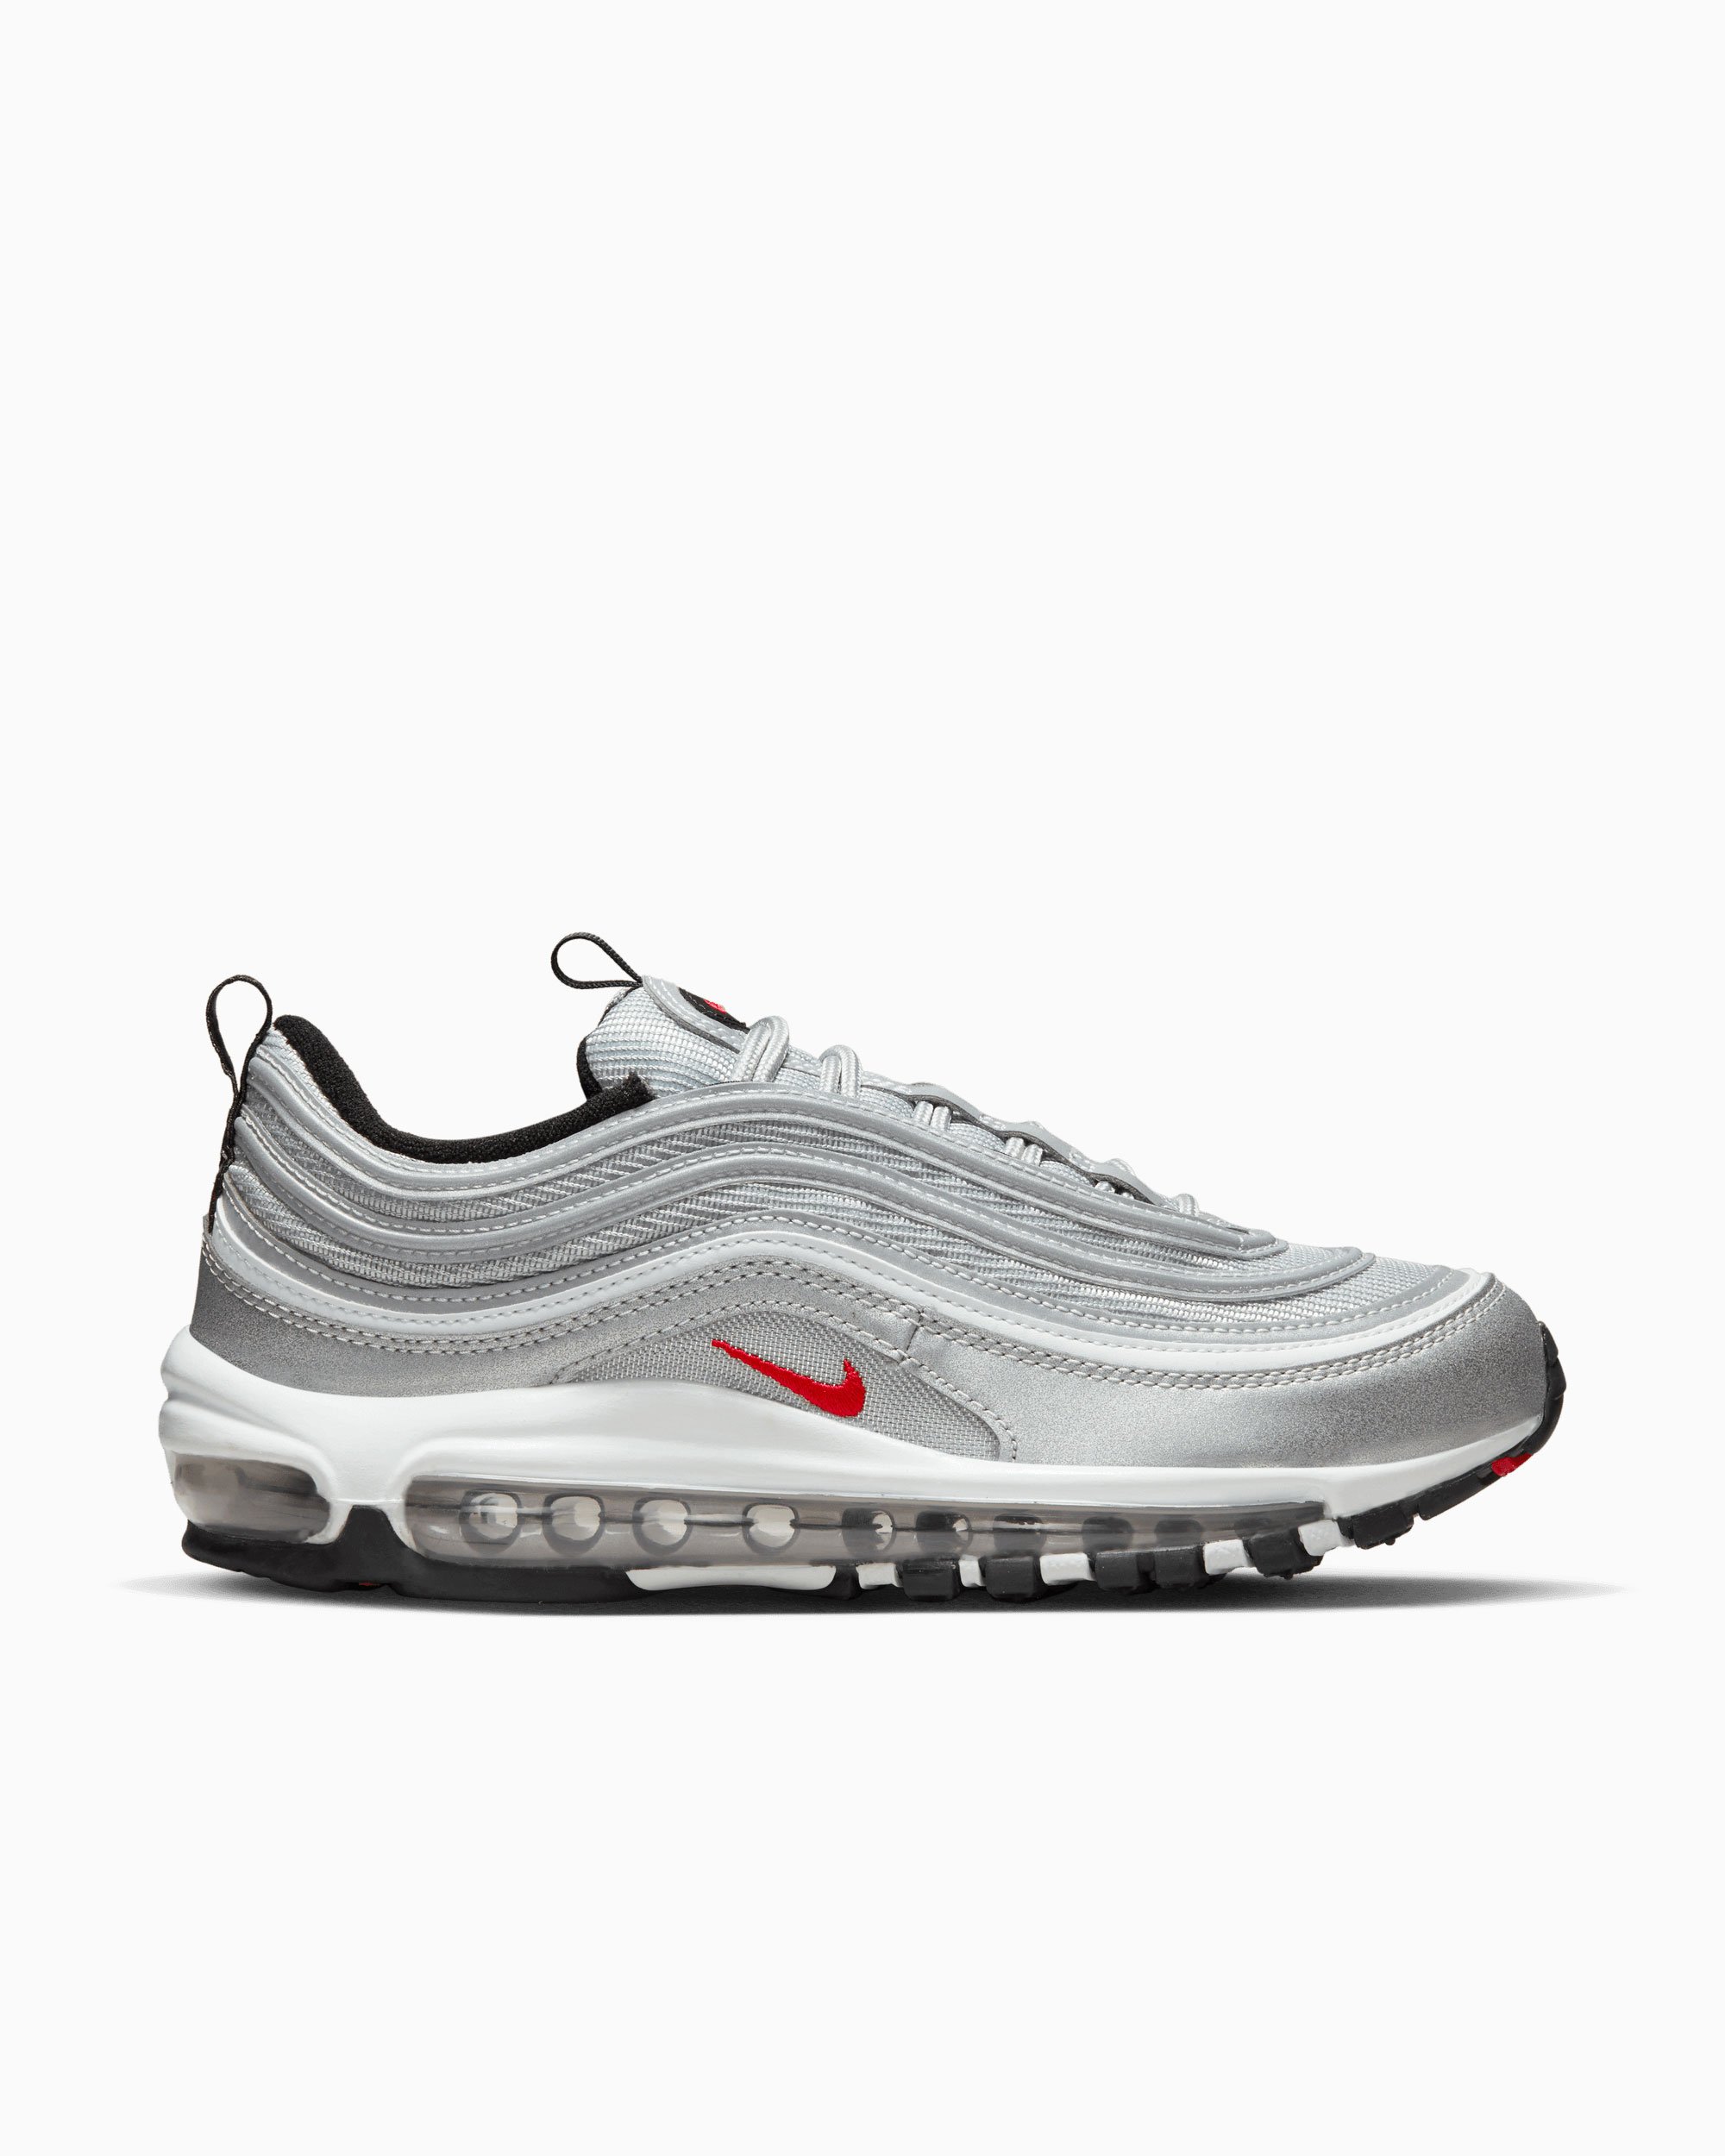 cleaner Clan String Nike Women's Air Max 97 OG "Silver Bullet" Gray DQ9131-002| Buy Online at  FOOTDISTRICT